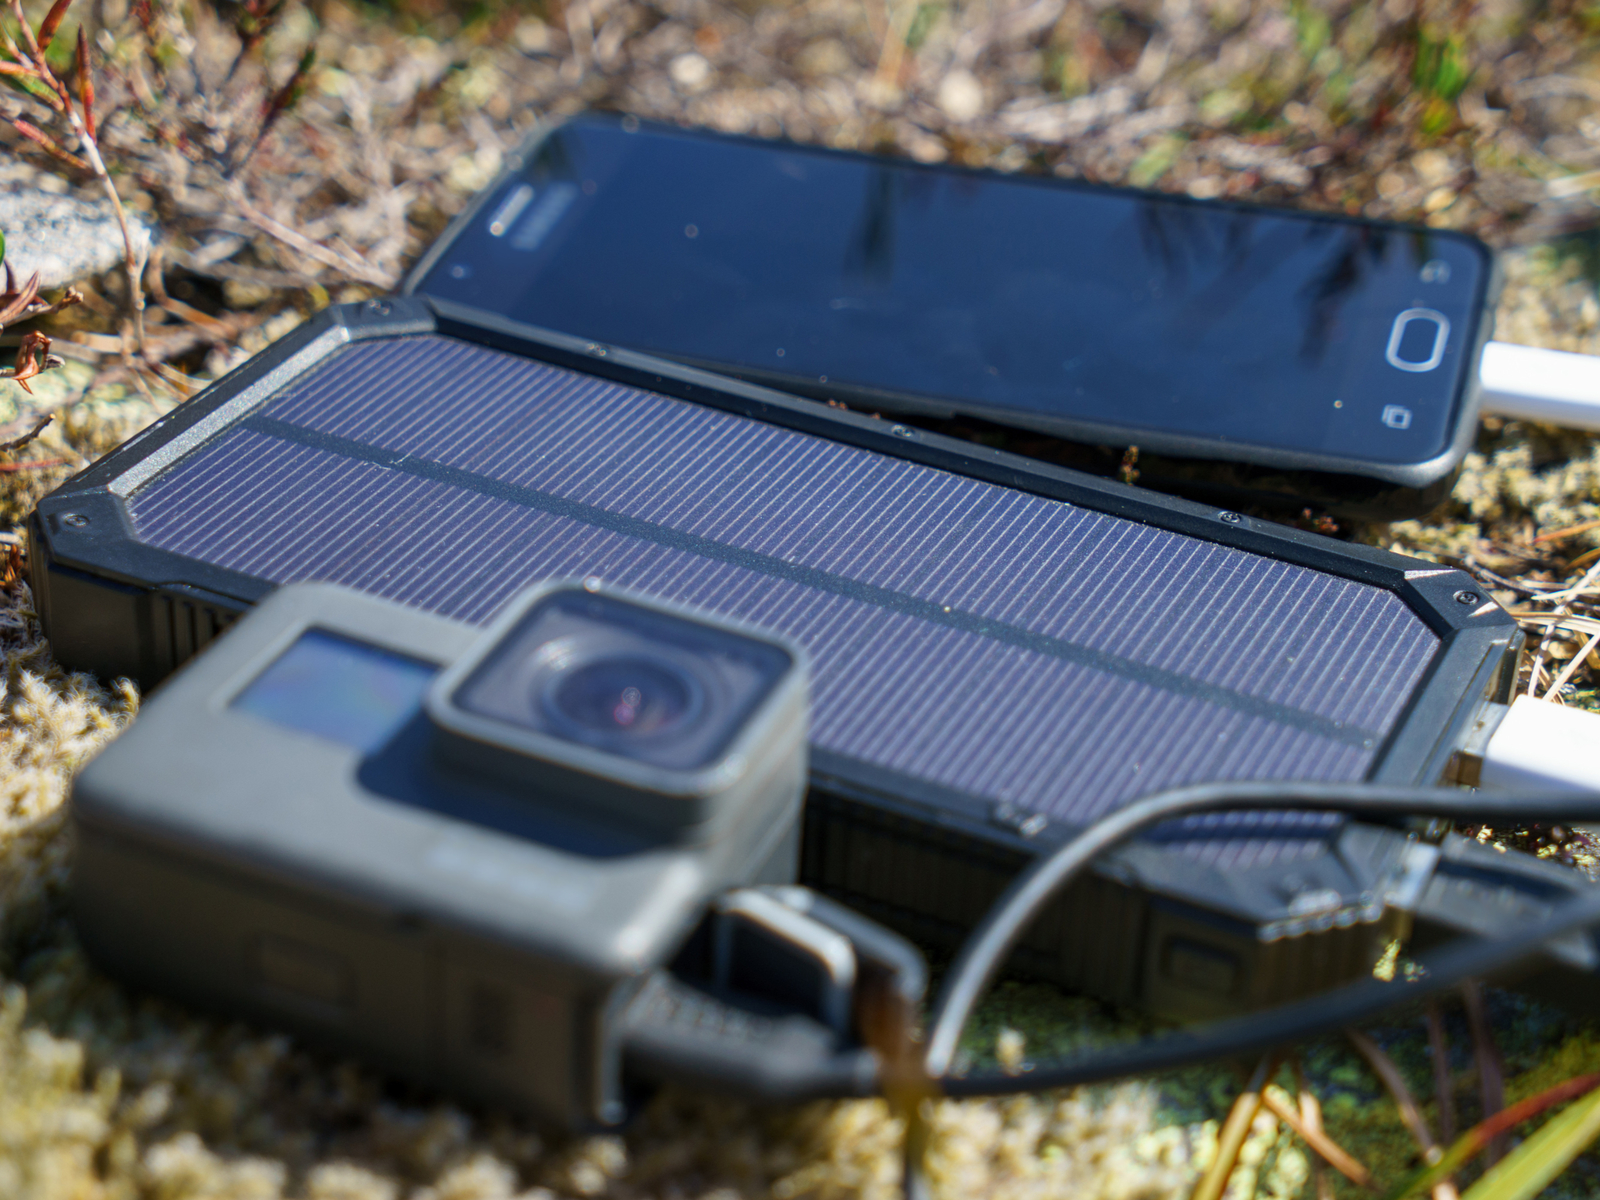 Photo of one of the best solar power banks charging an action cam and phone on some grass